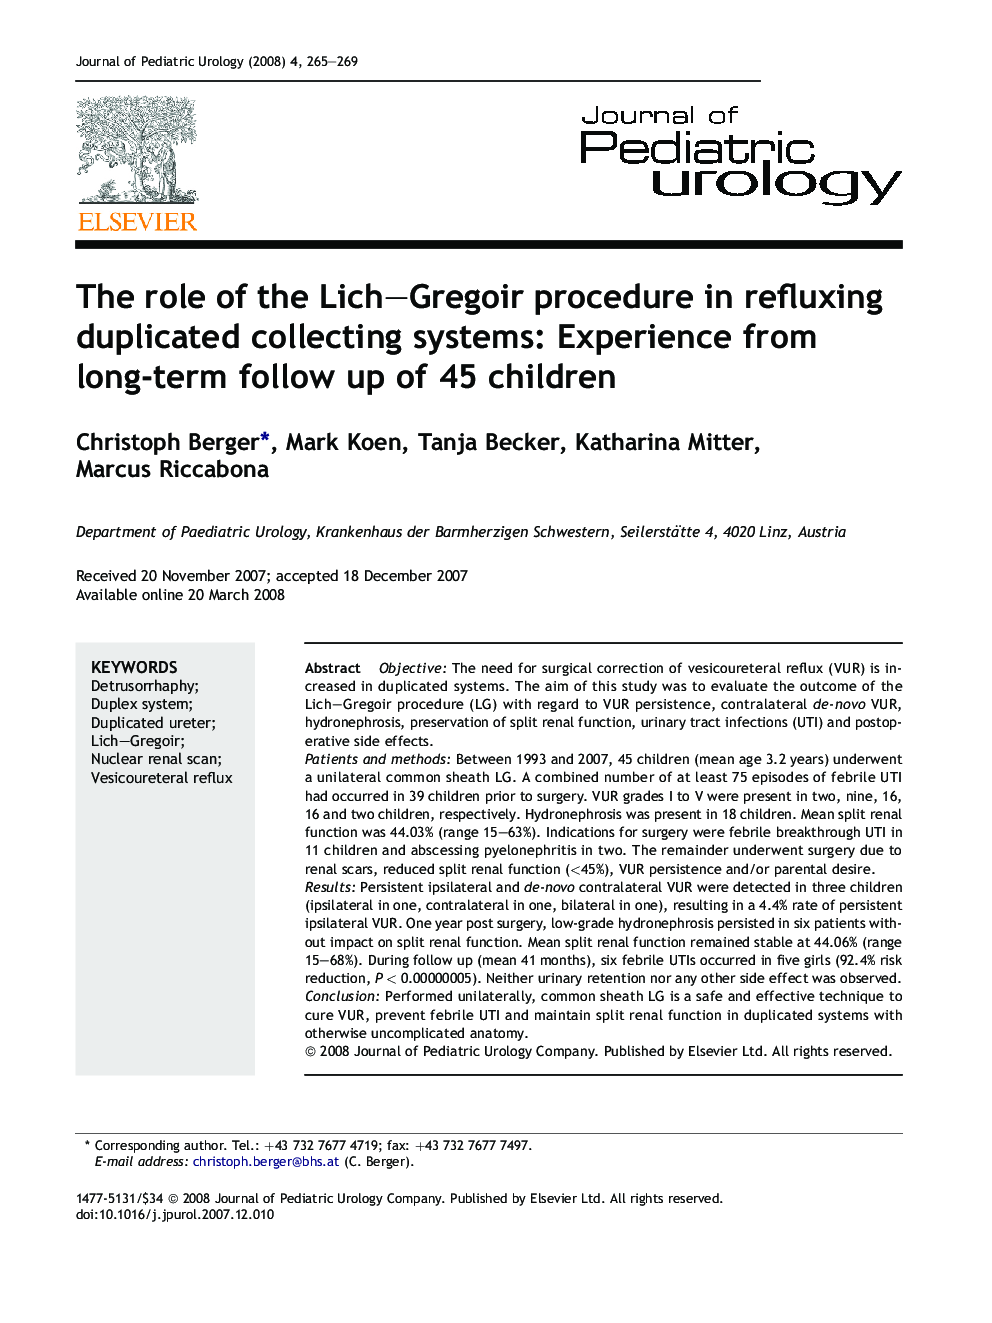 The role of the Lich–Gregoir procedure in refluxing duplicated collecting systems: Experience from long-term follow up of 45 children